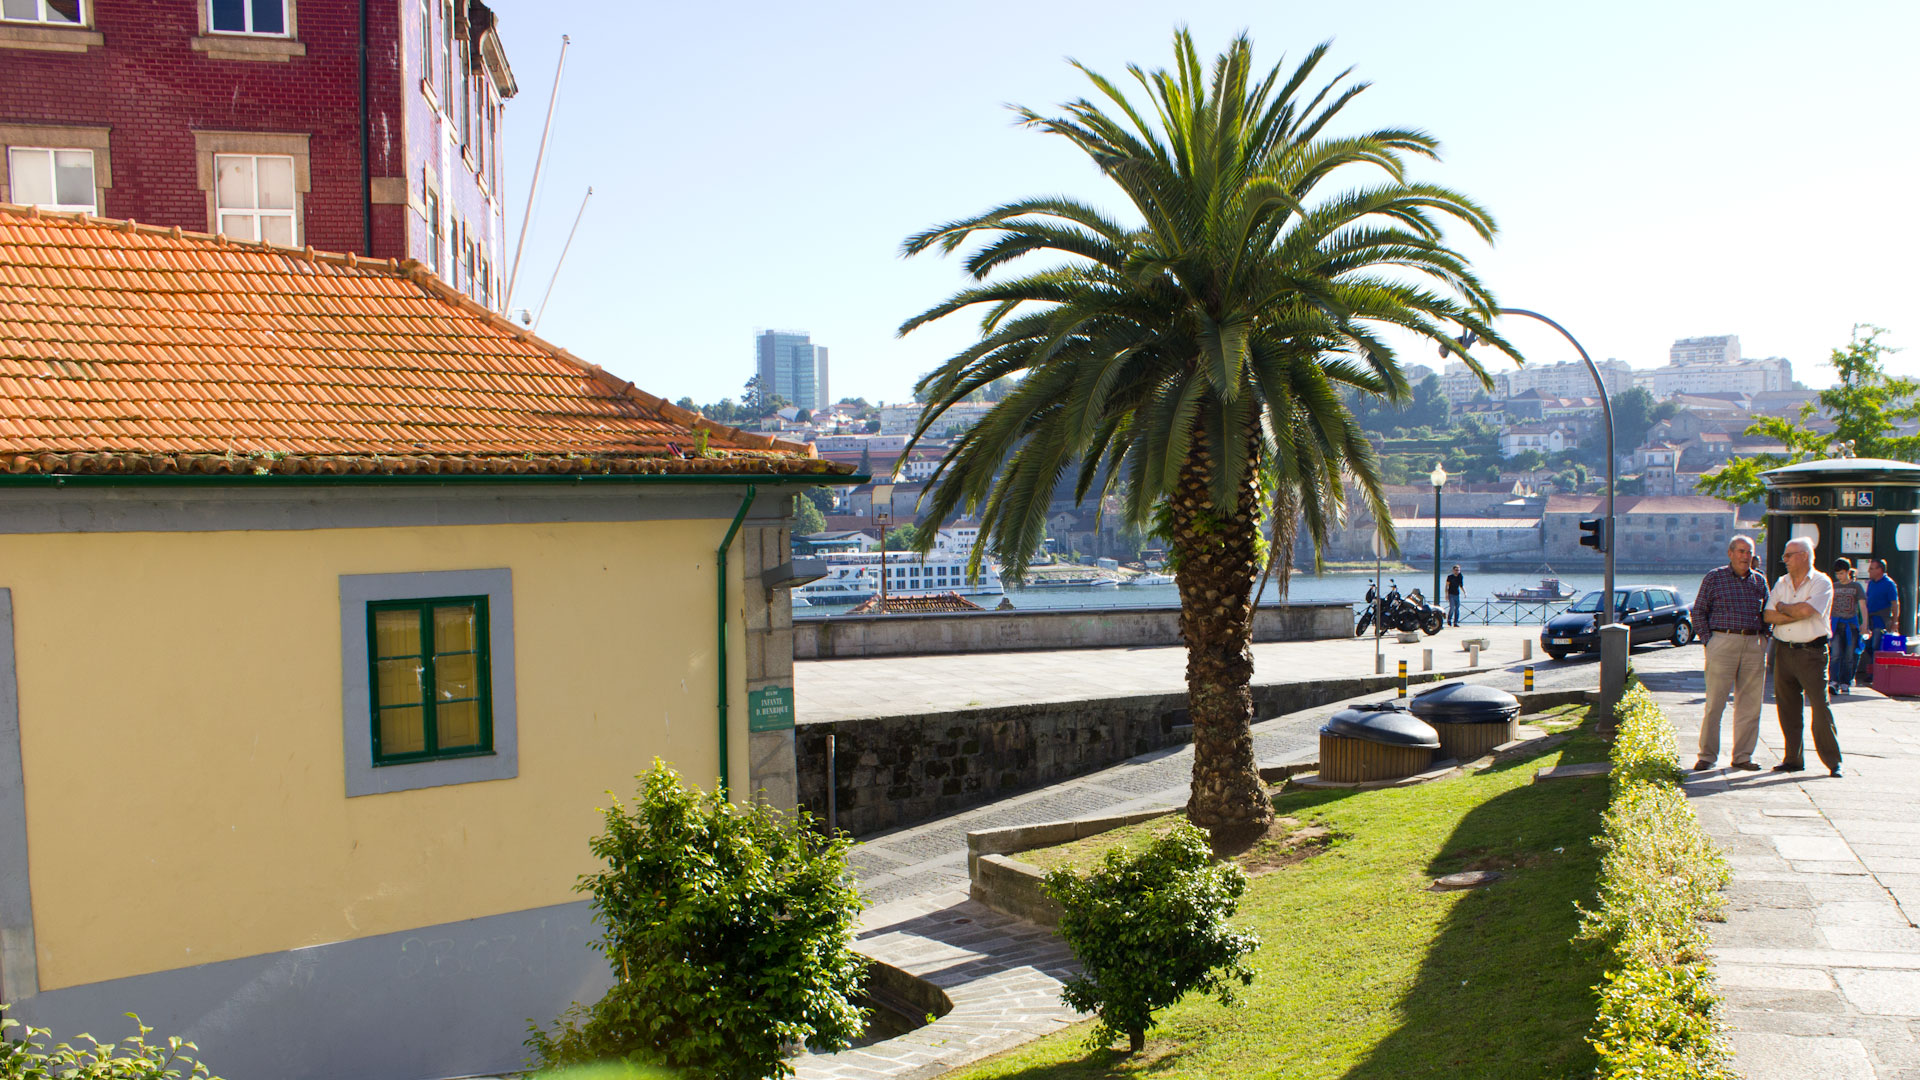 Palms and historical buildings in Portugal